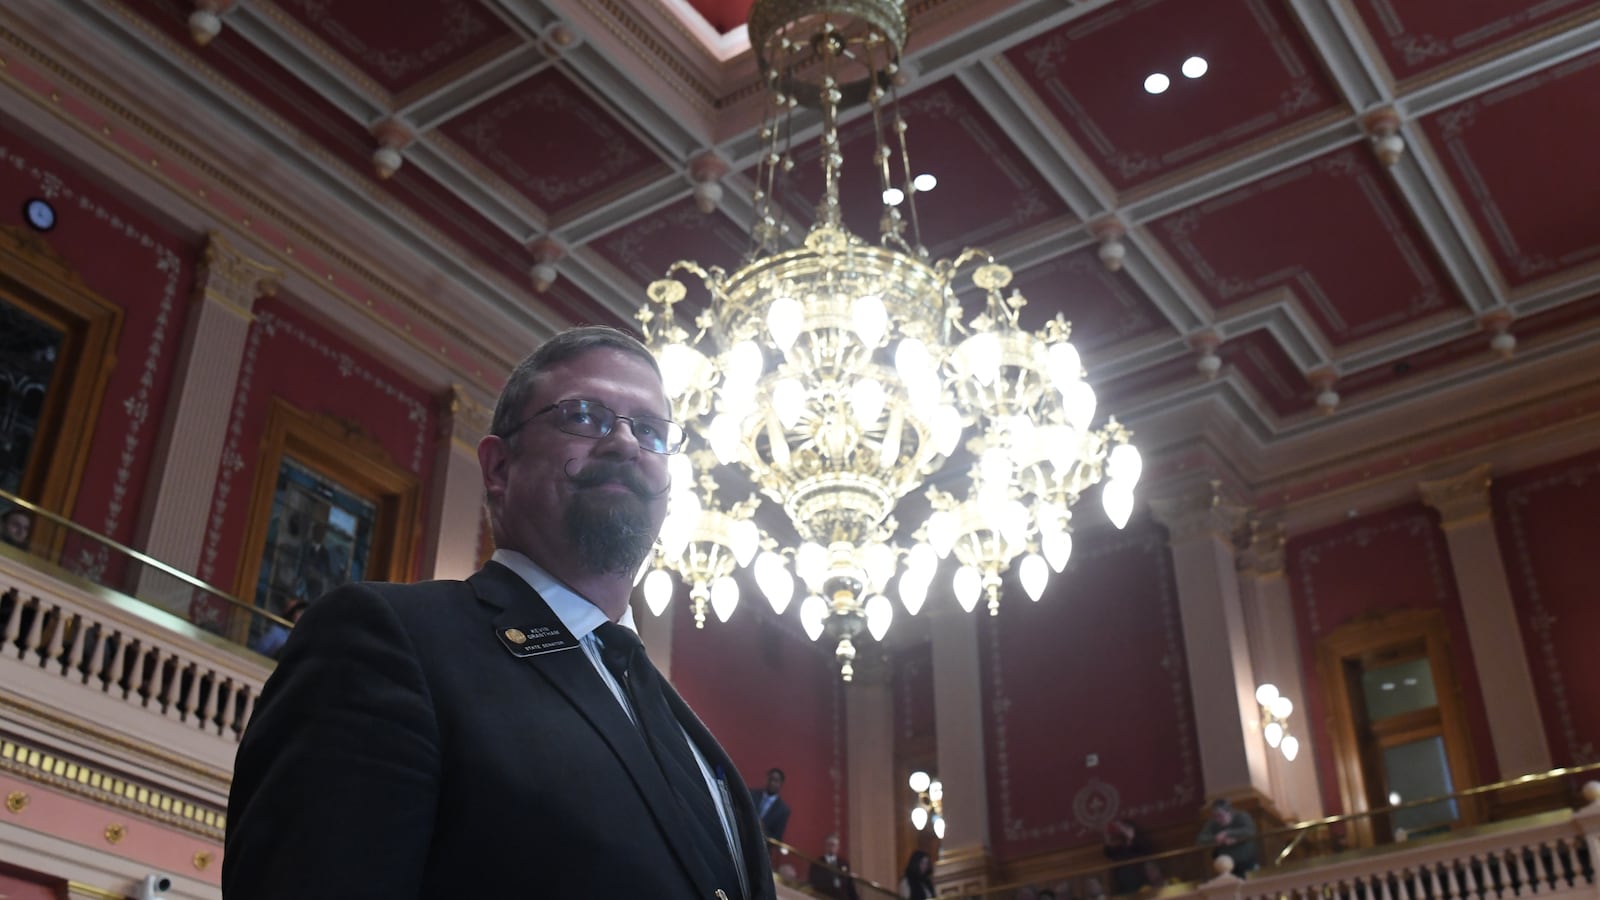 Senate President Kevin Grantham at the Colorado State Capitol, January 11, 2017.